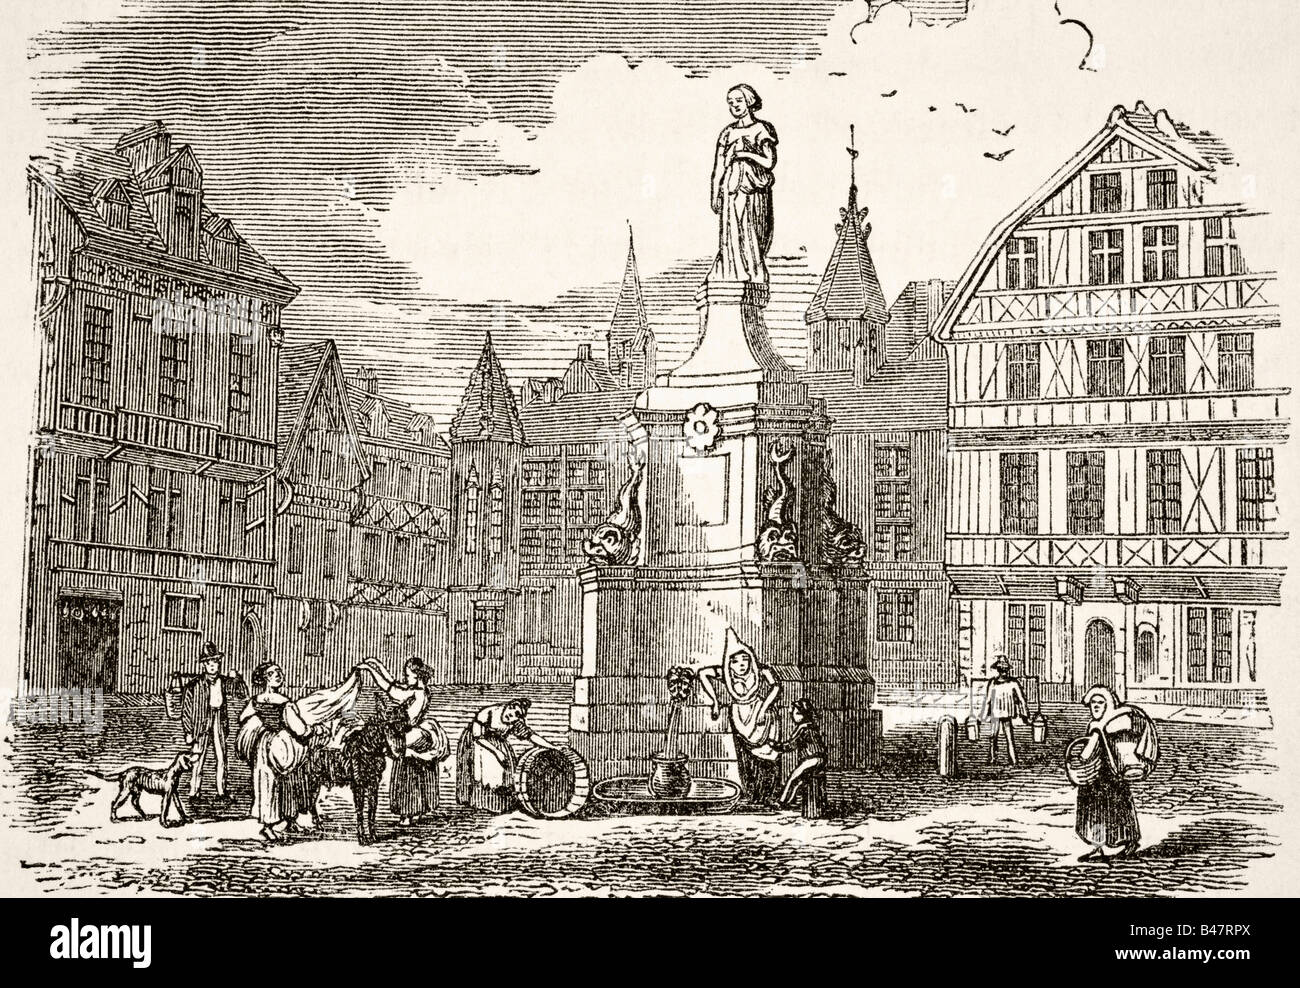 Joan of Arc statue in the Old Market Place, Rouen, France, in the 19th century. Stock Photo